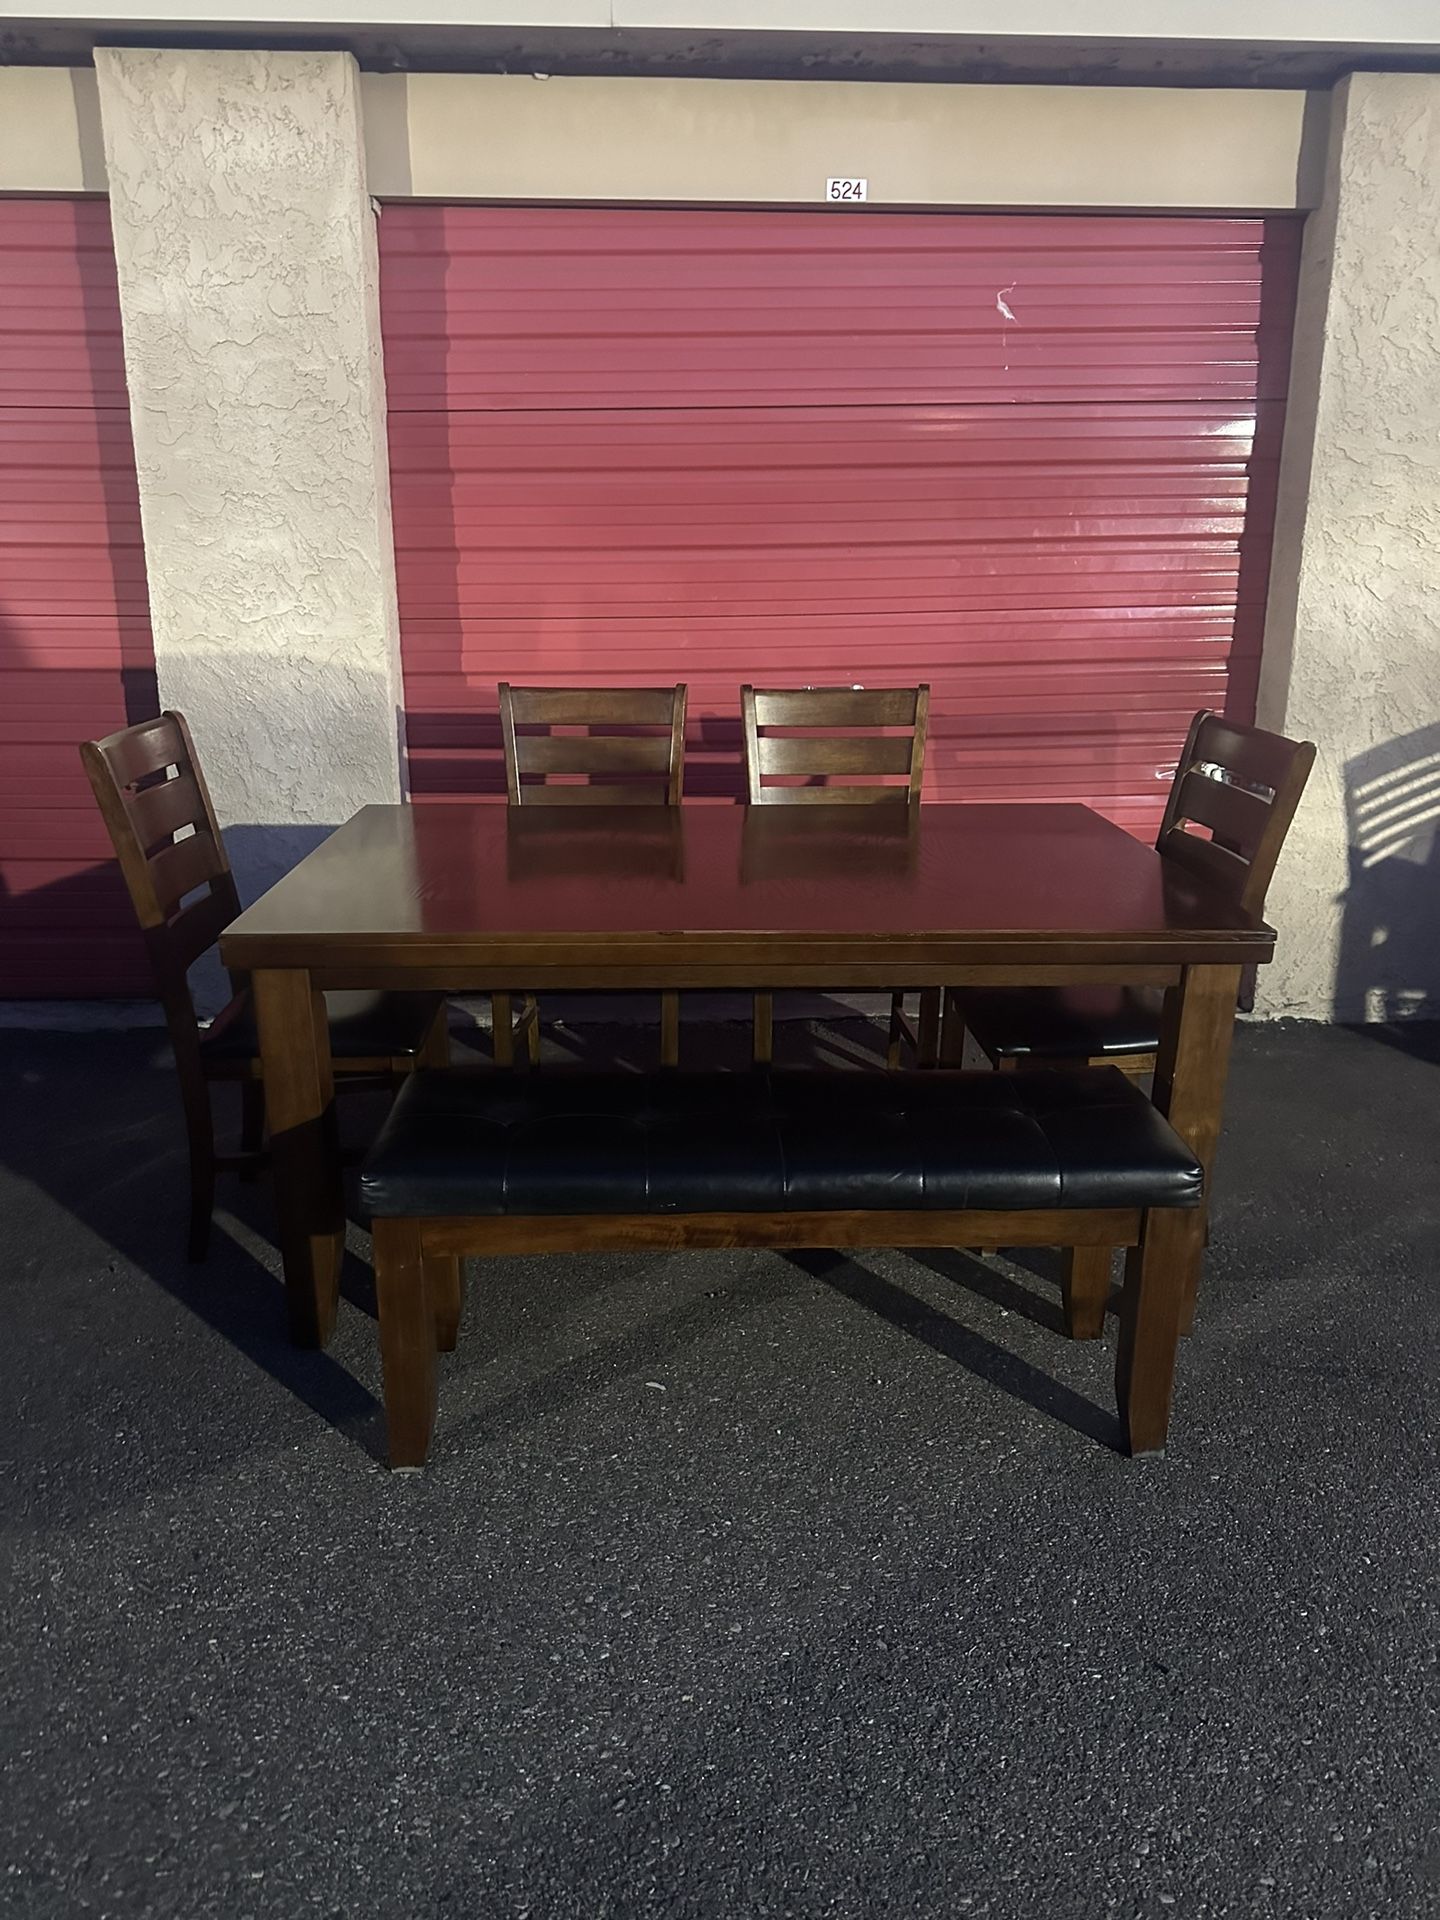 4 Chairs And Bench Set